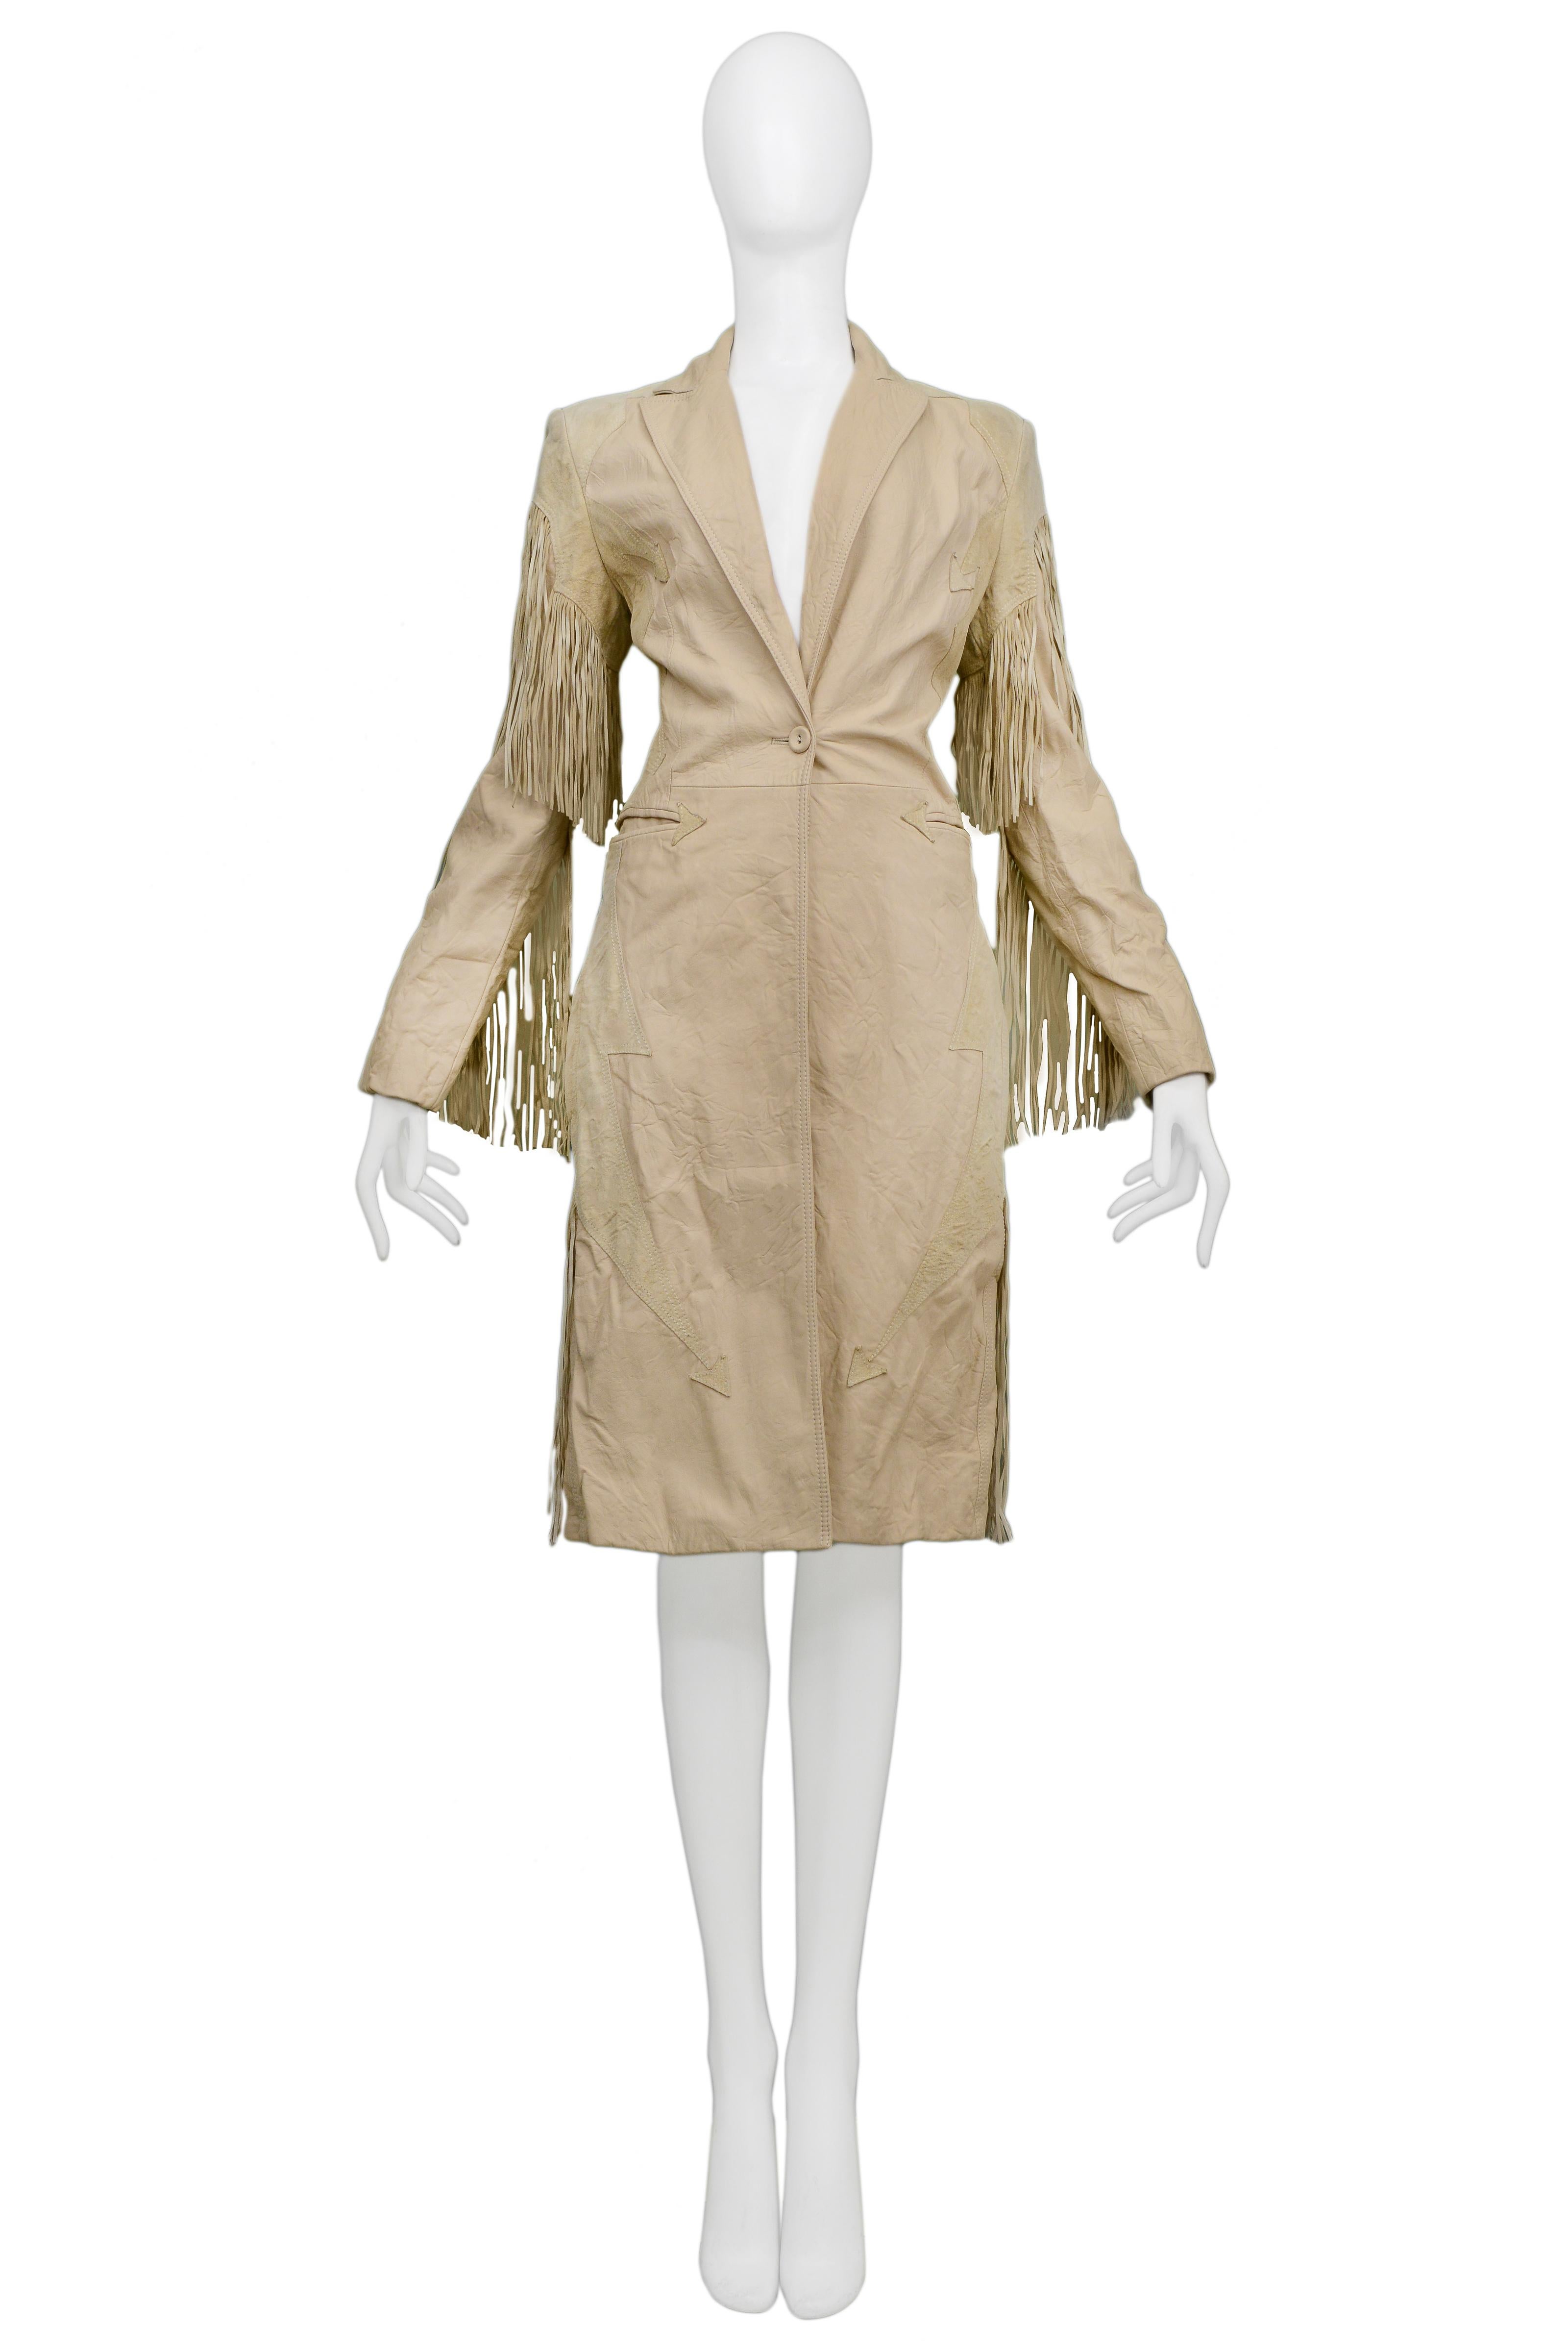 We are excited to offer a vintage Versace western-inspired tan leather coat featuring tailored notch collar and slim lapels, heavy fringe, arrow appliques, elbow insets, one-button closure, slit pockets with arrow insets, button cuffs, and back